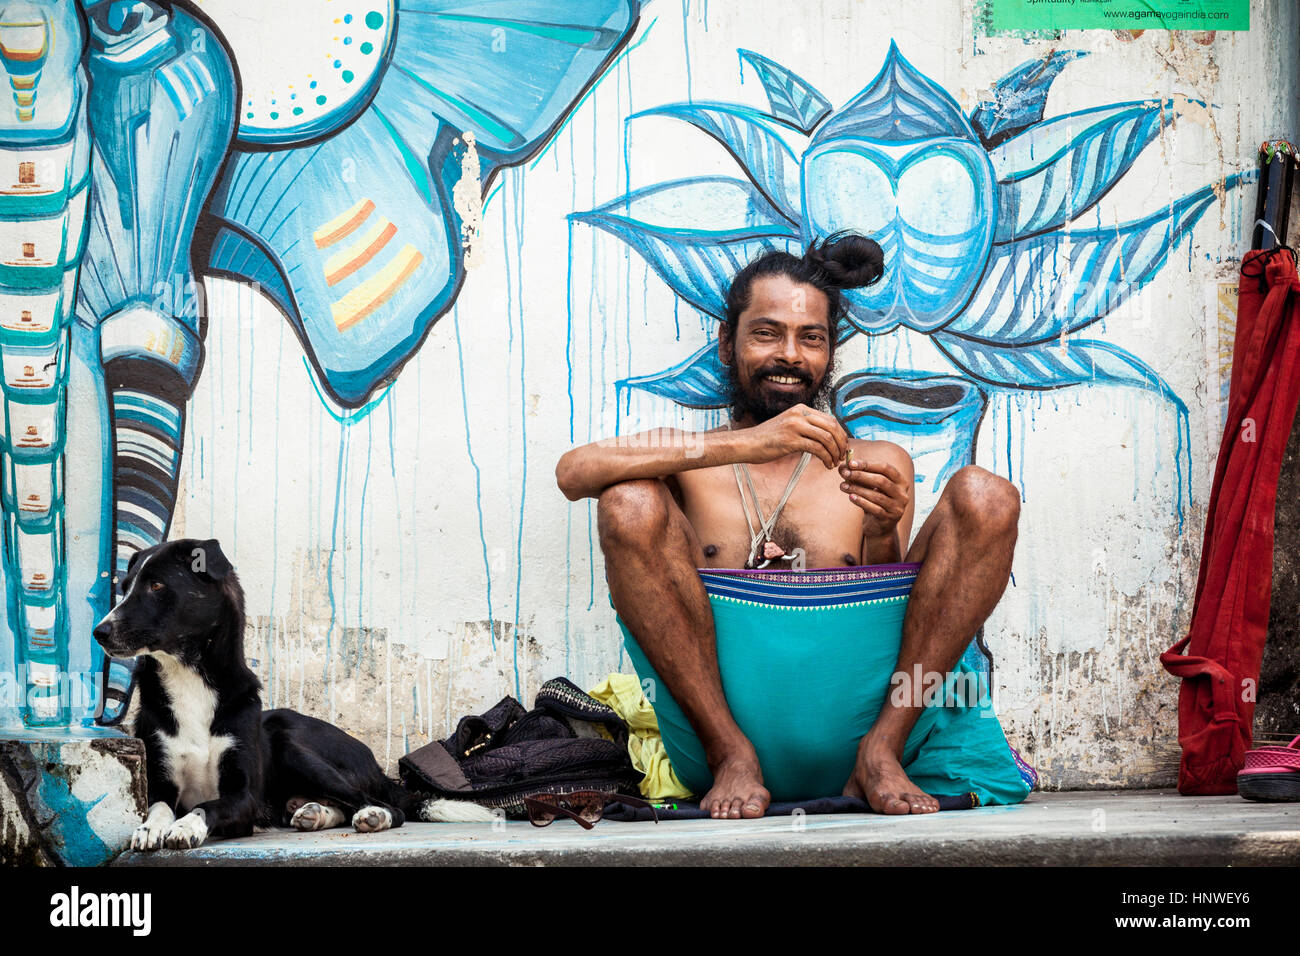 Rishikesh, India - September 22, 2014: Young pilgrim with dog sits near the wall painted with street art in Rishikesh, India. Stock Photo